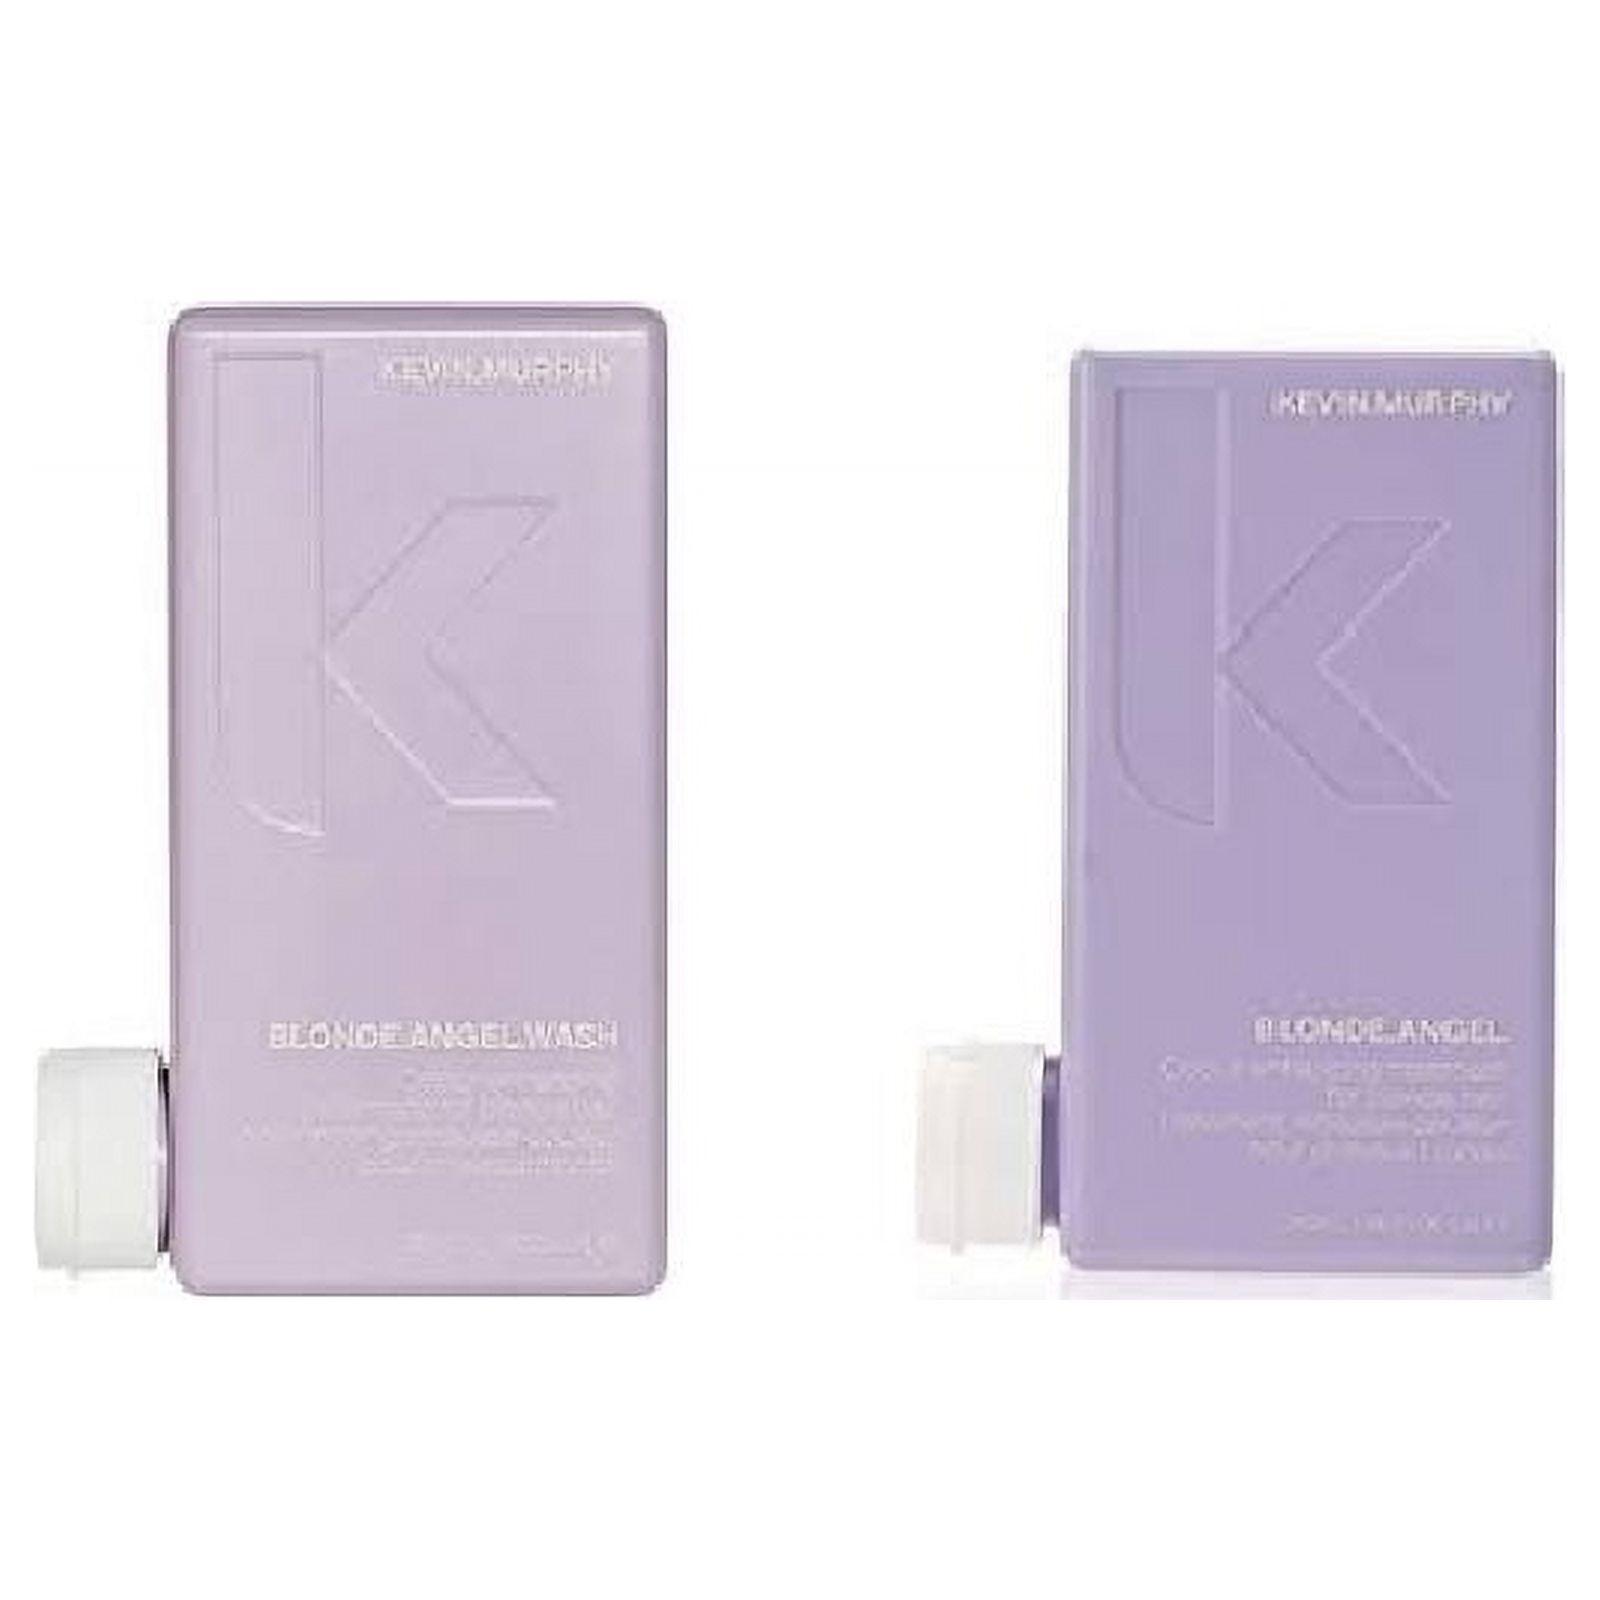 Kevin Murphy Blonde Angel Wash and Rinse Set - 8.4 oz - image 1 of 2